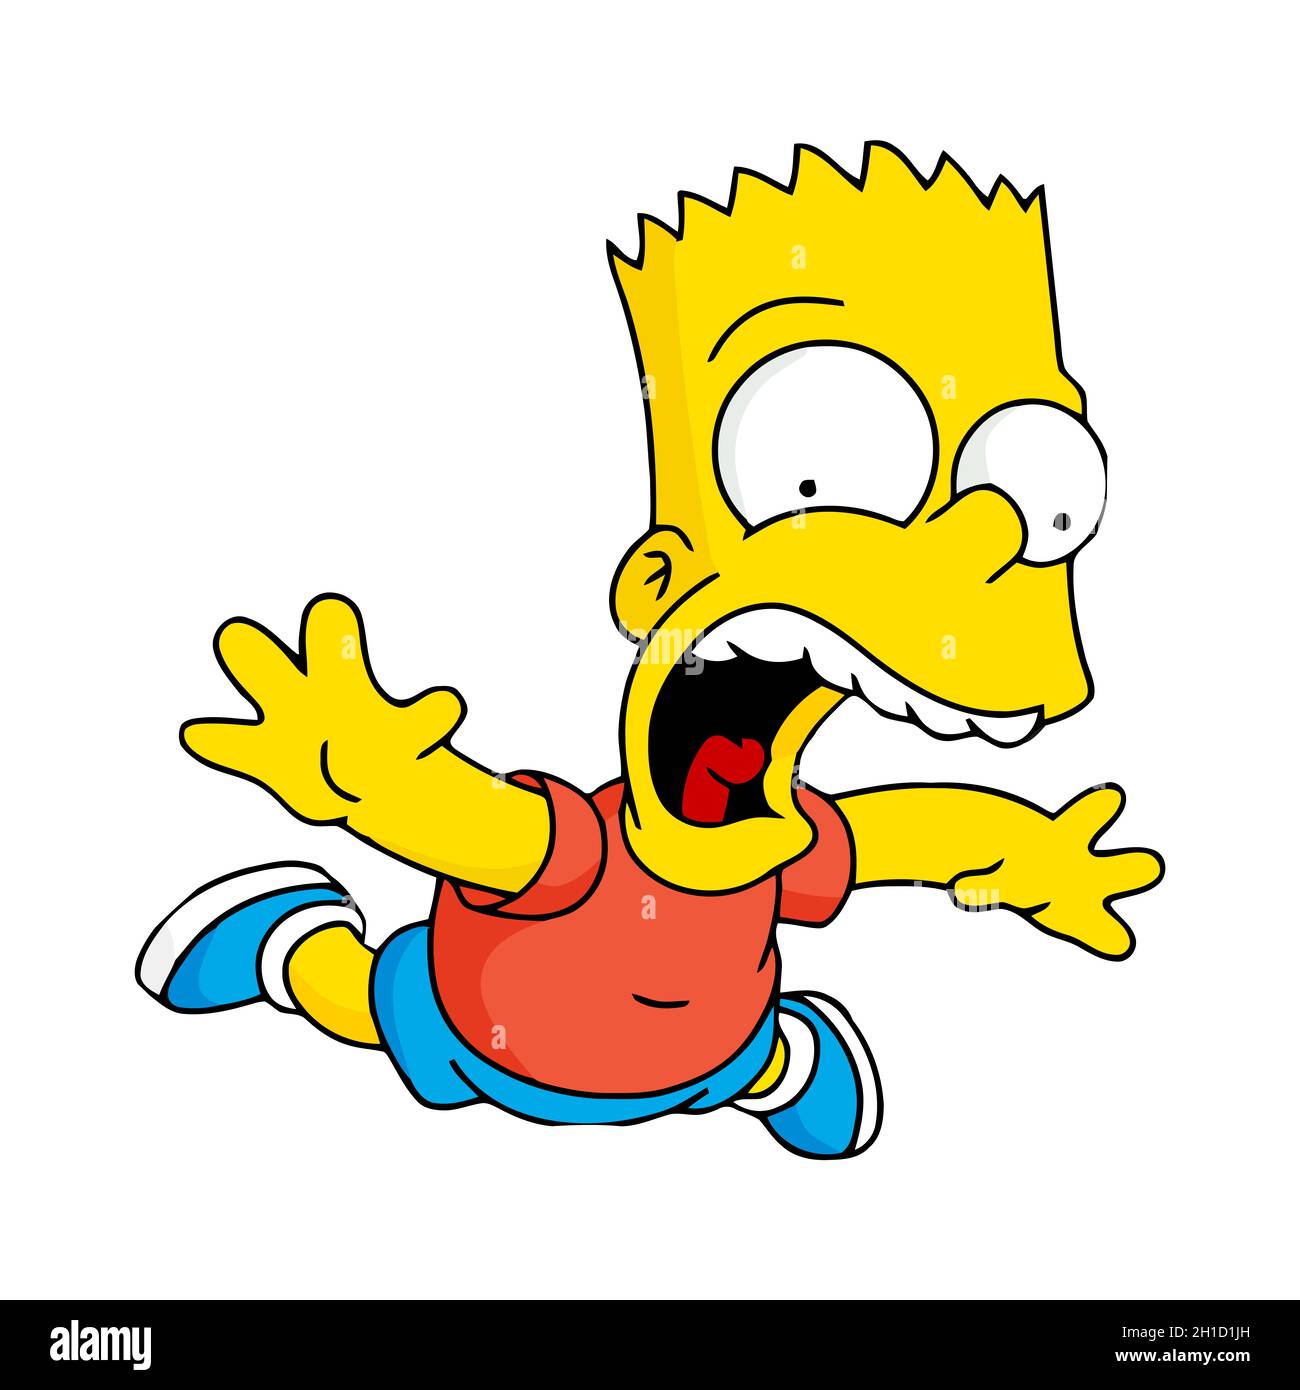 Bart The Simpsons Falling illustration caricature éditorial Banque D'Images